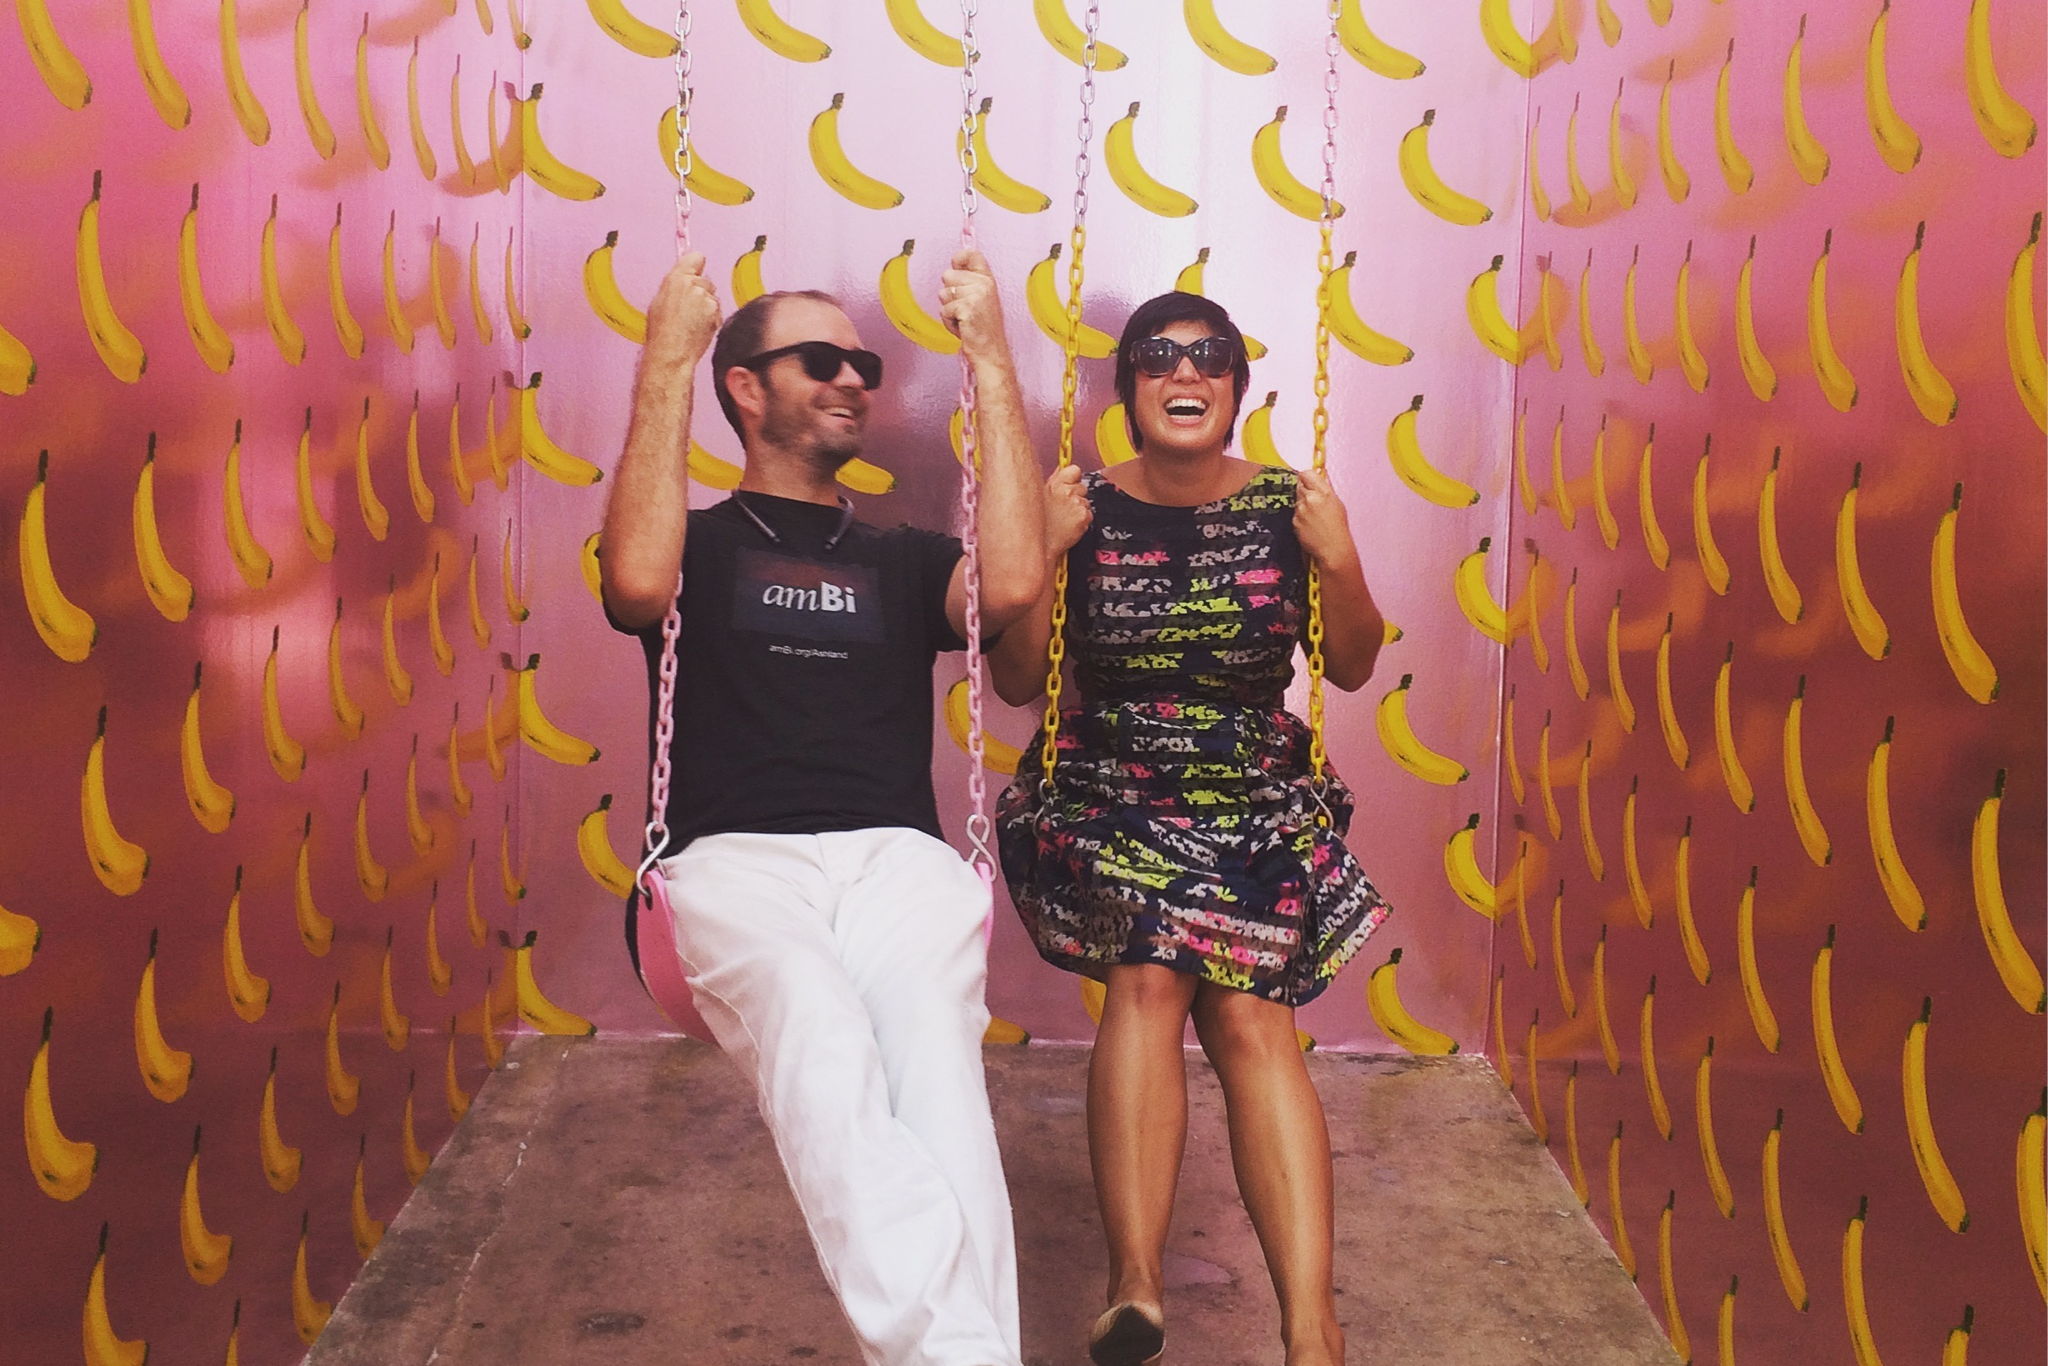 Talia and Rio laughing while on a set of swings inside a pink room with cartoon banana drawing wallpaper.